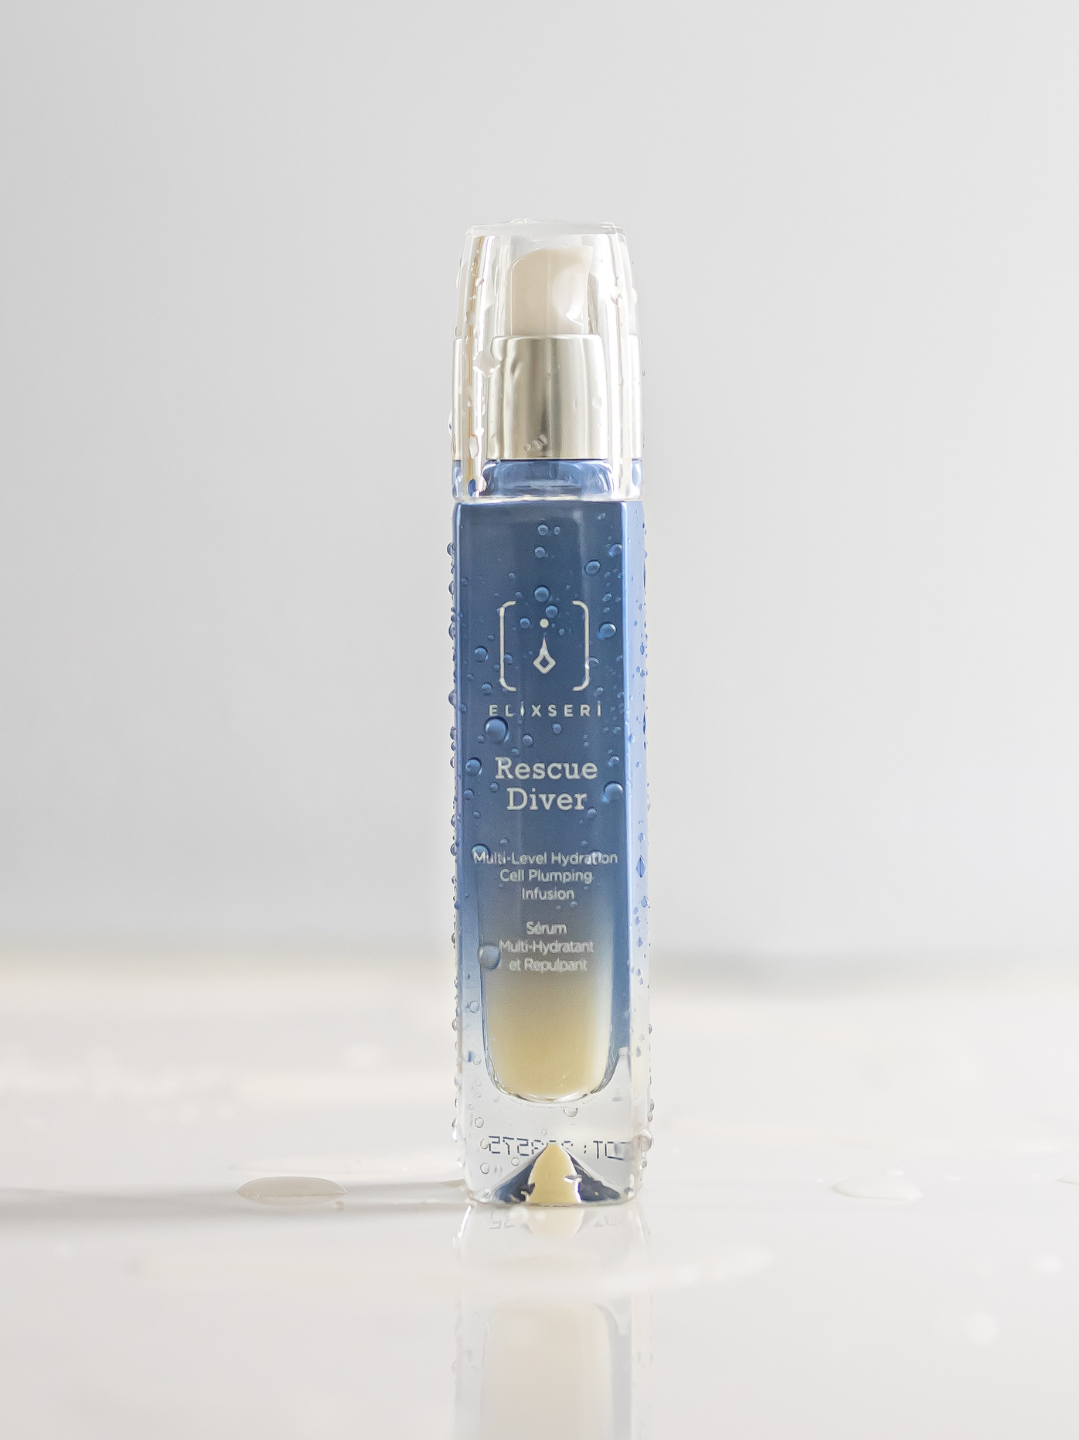 Elixseri's Rescue Diver multi level hydation serum pictured with drops of water on the bottle